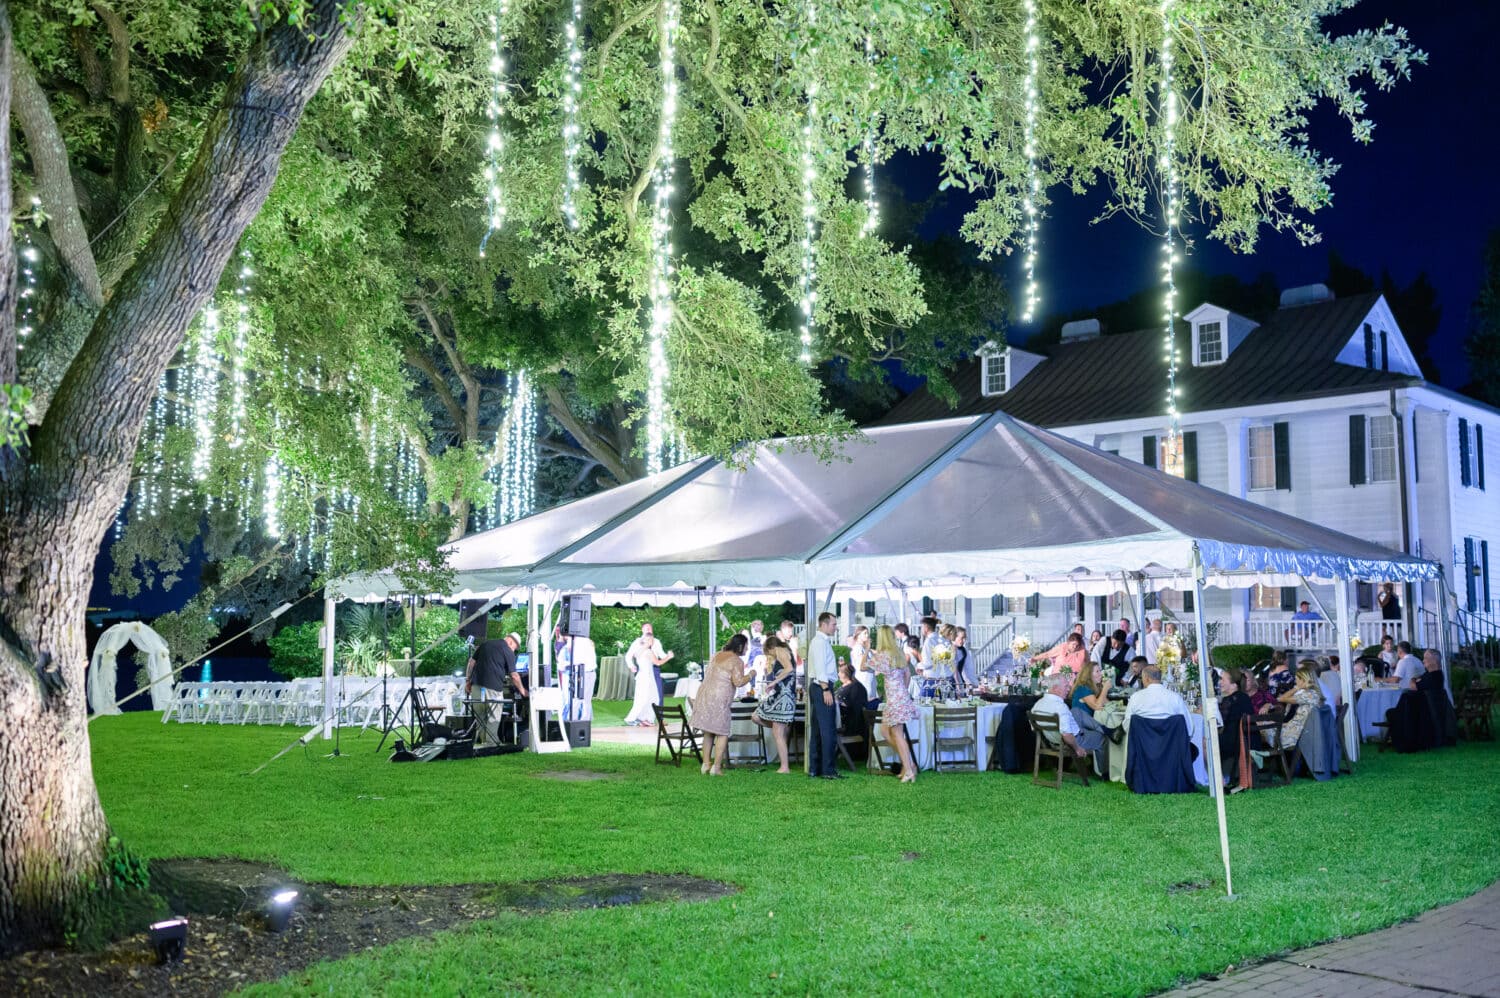 Pictures of the reception tent with lights hanging from the trees - Kaminski House Museum